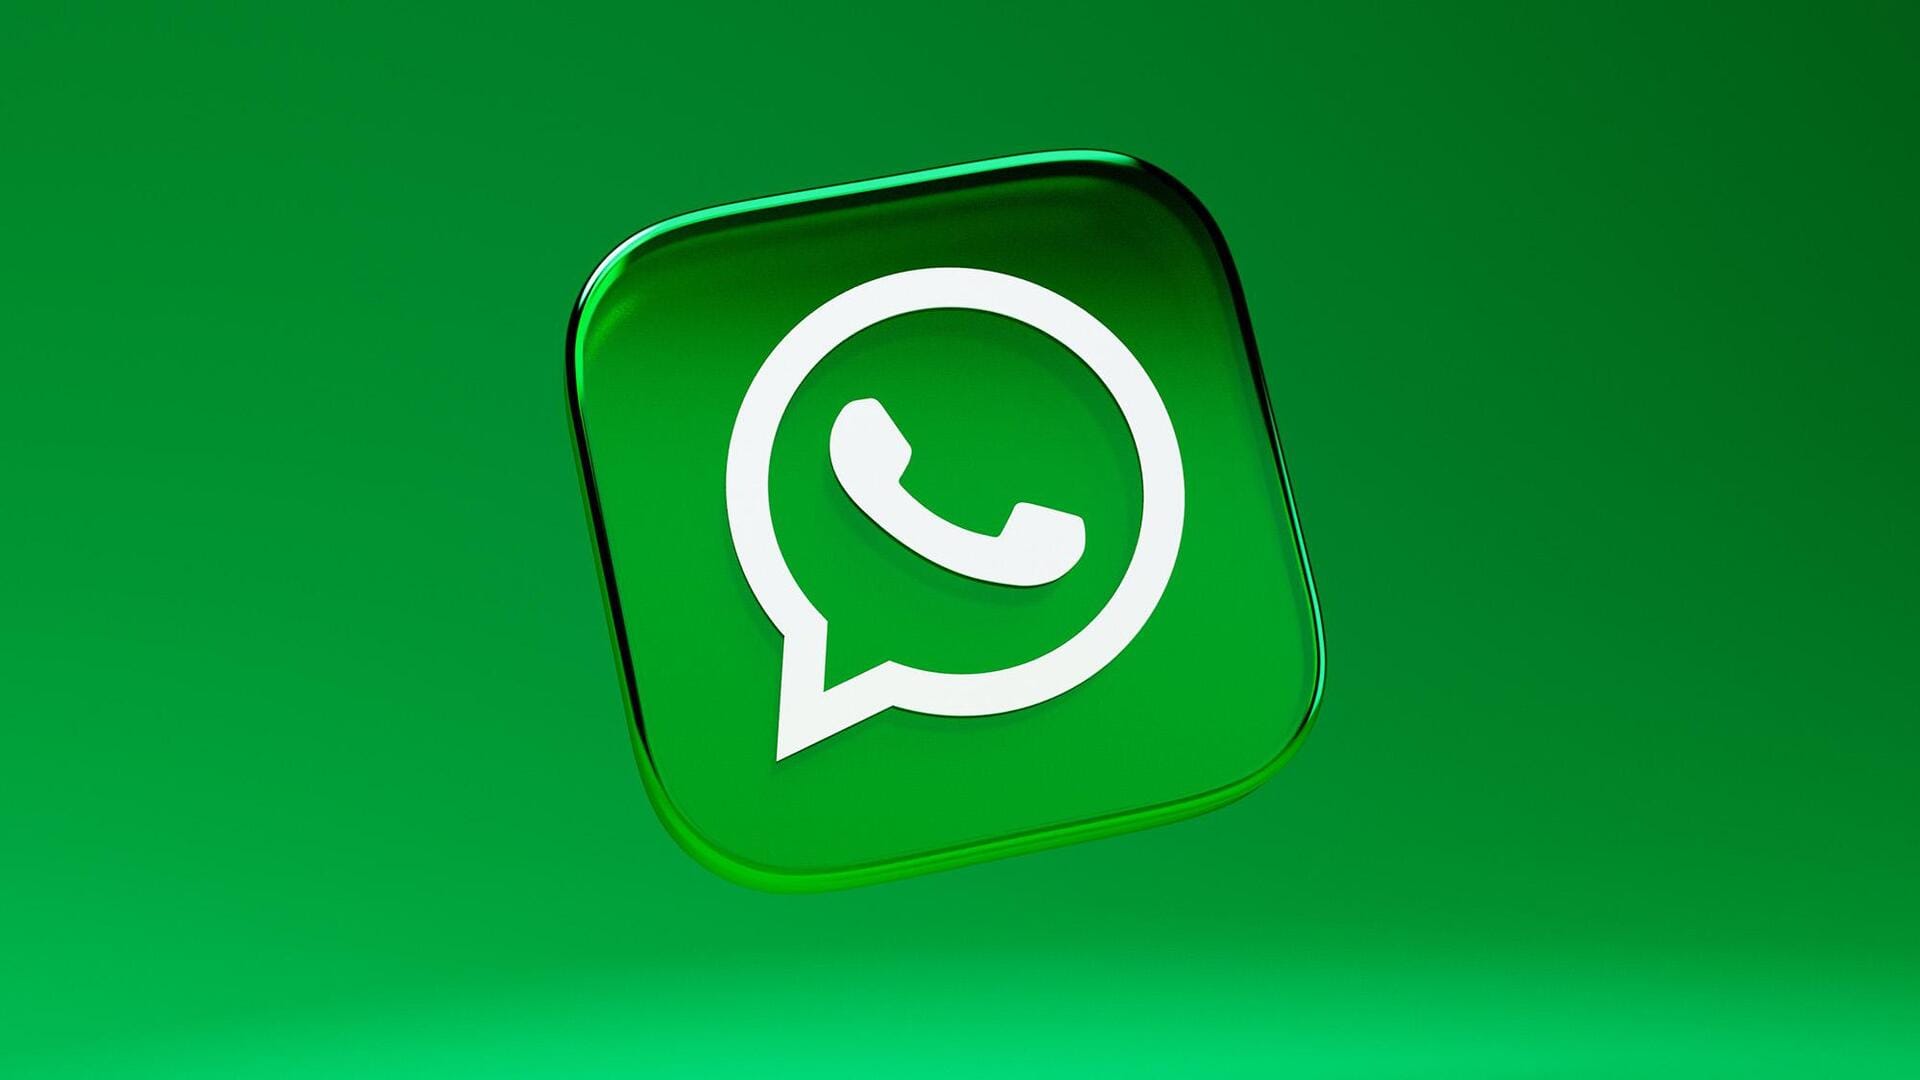 WhatsApp update for Android brings quickly reply to video messages